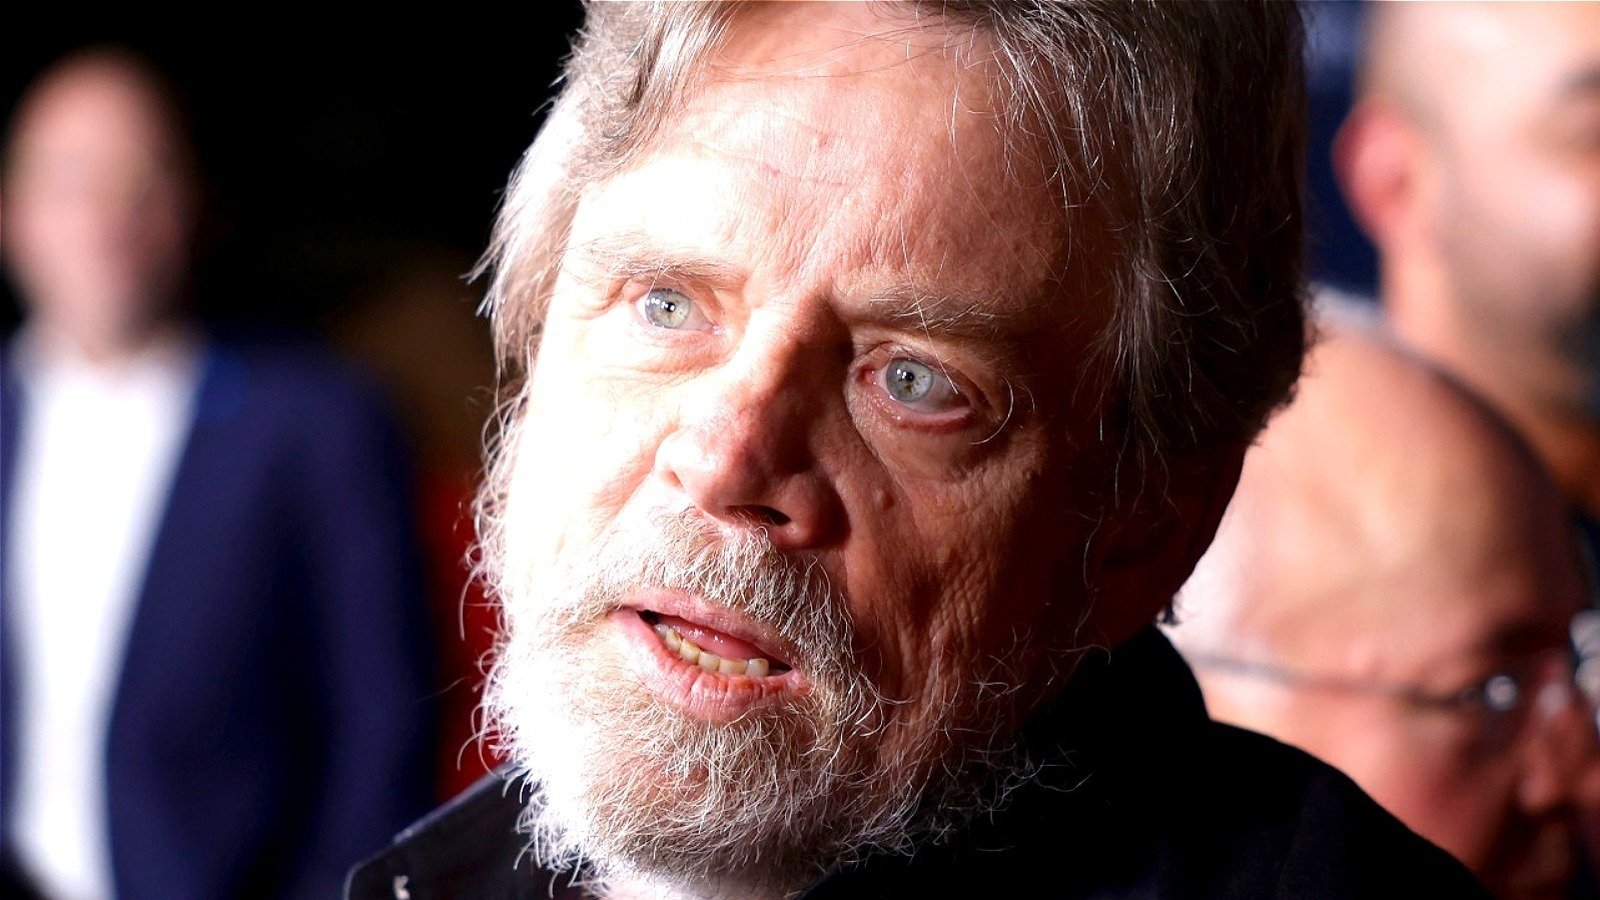 Mark Hamill Confirms What We All Suspected About Harrison Ford's On-Set Behavior - Looper